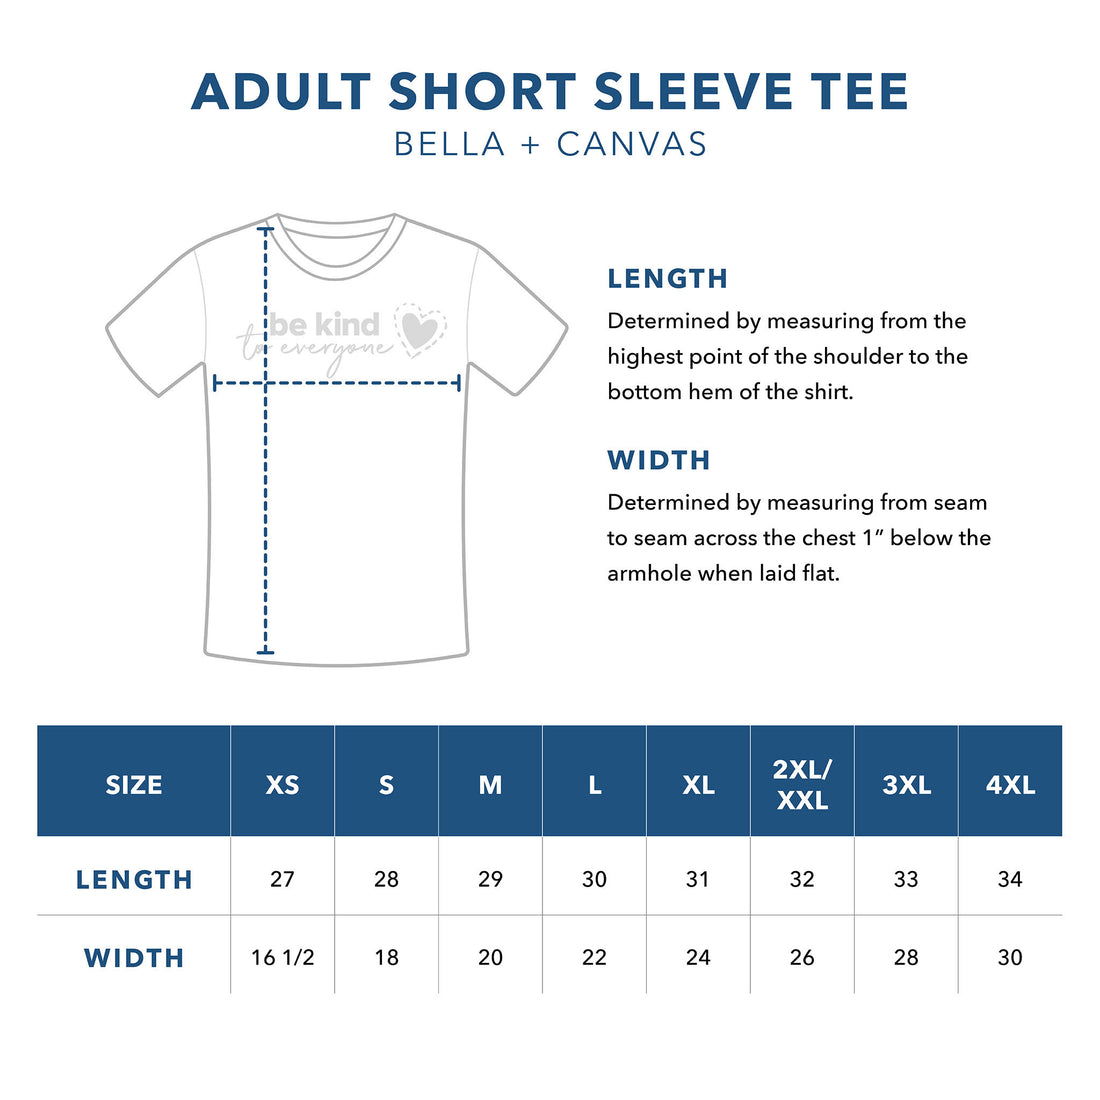 Adult Bella Canvas Short Sleeve Tee Sizing Guide